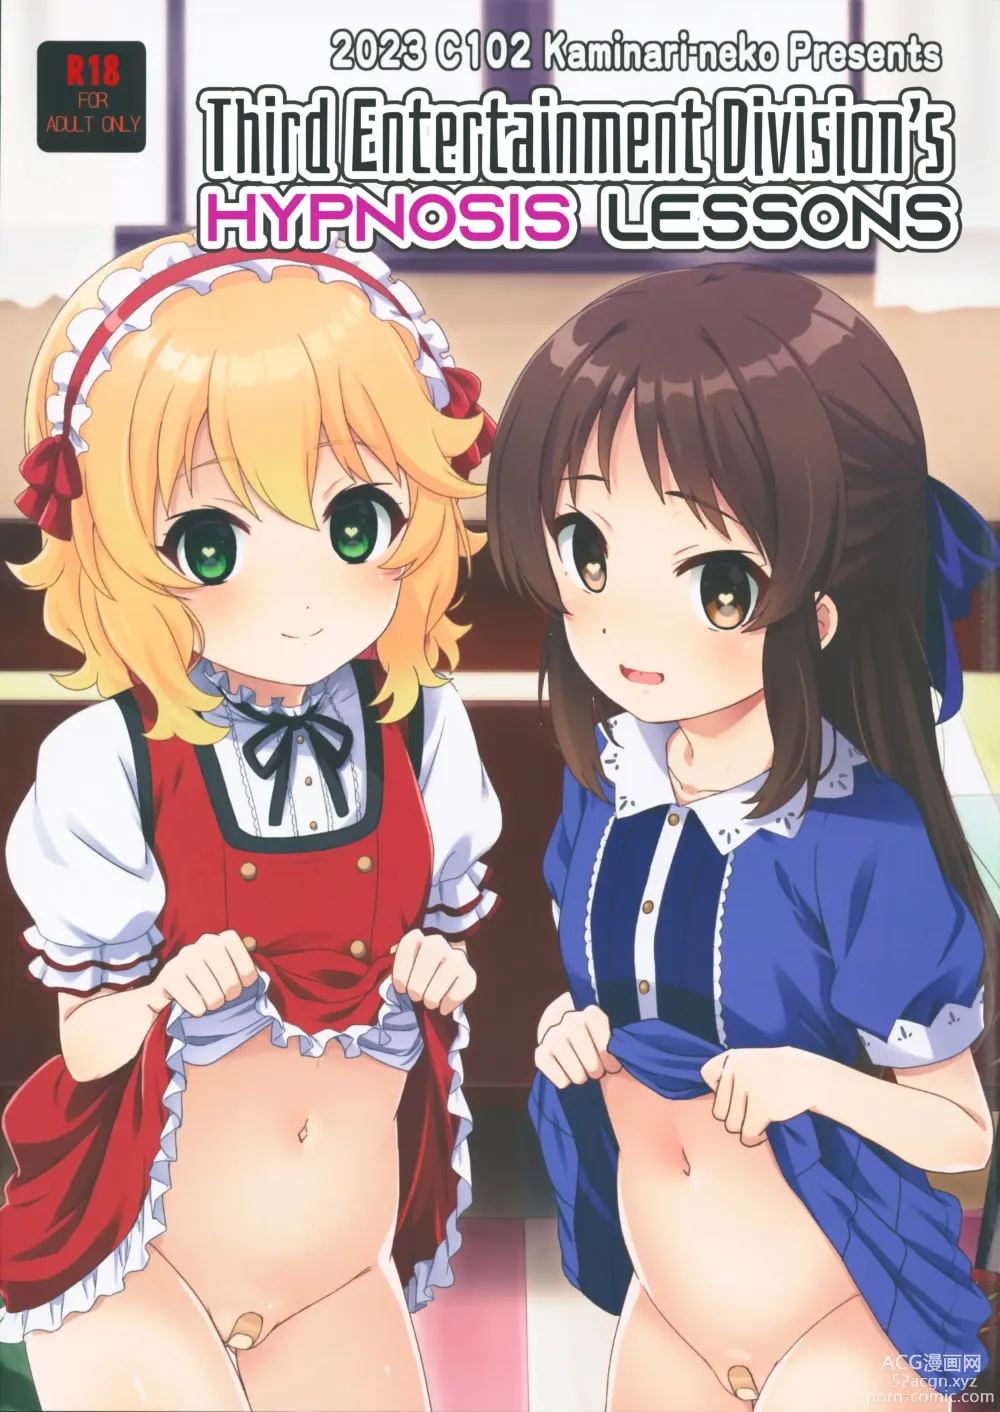 Page 1 of doujinshi Third Entertainment Division's Hypnosis Lessons